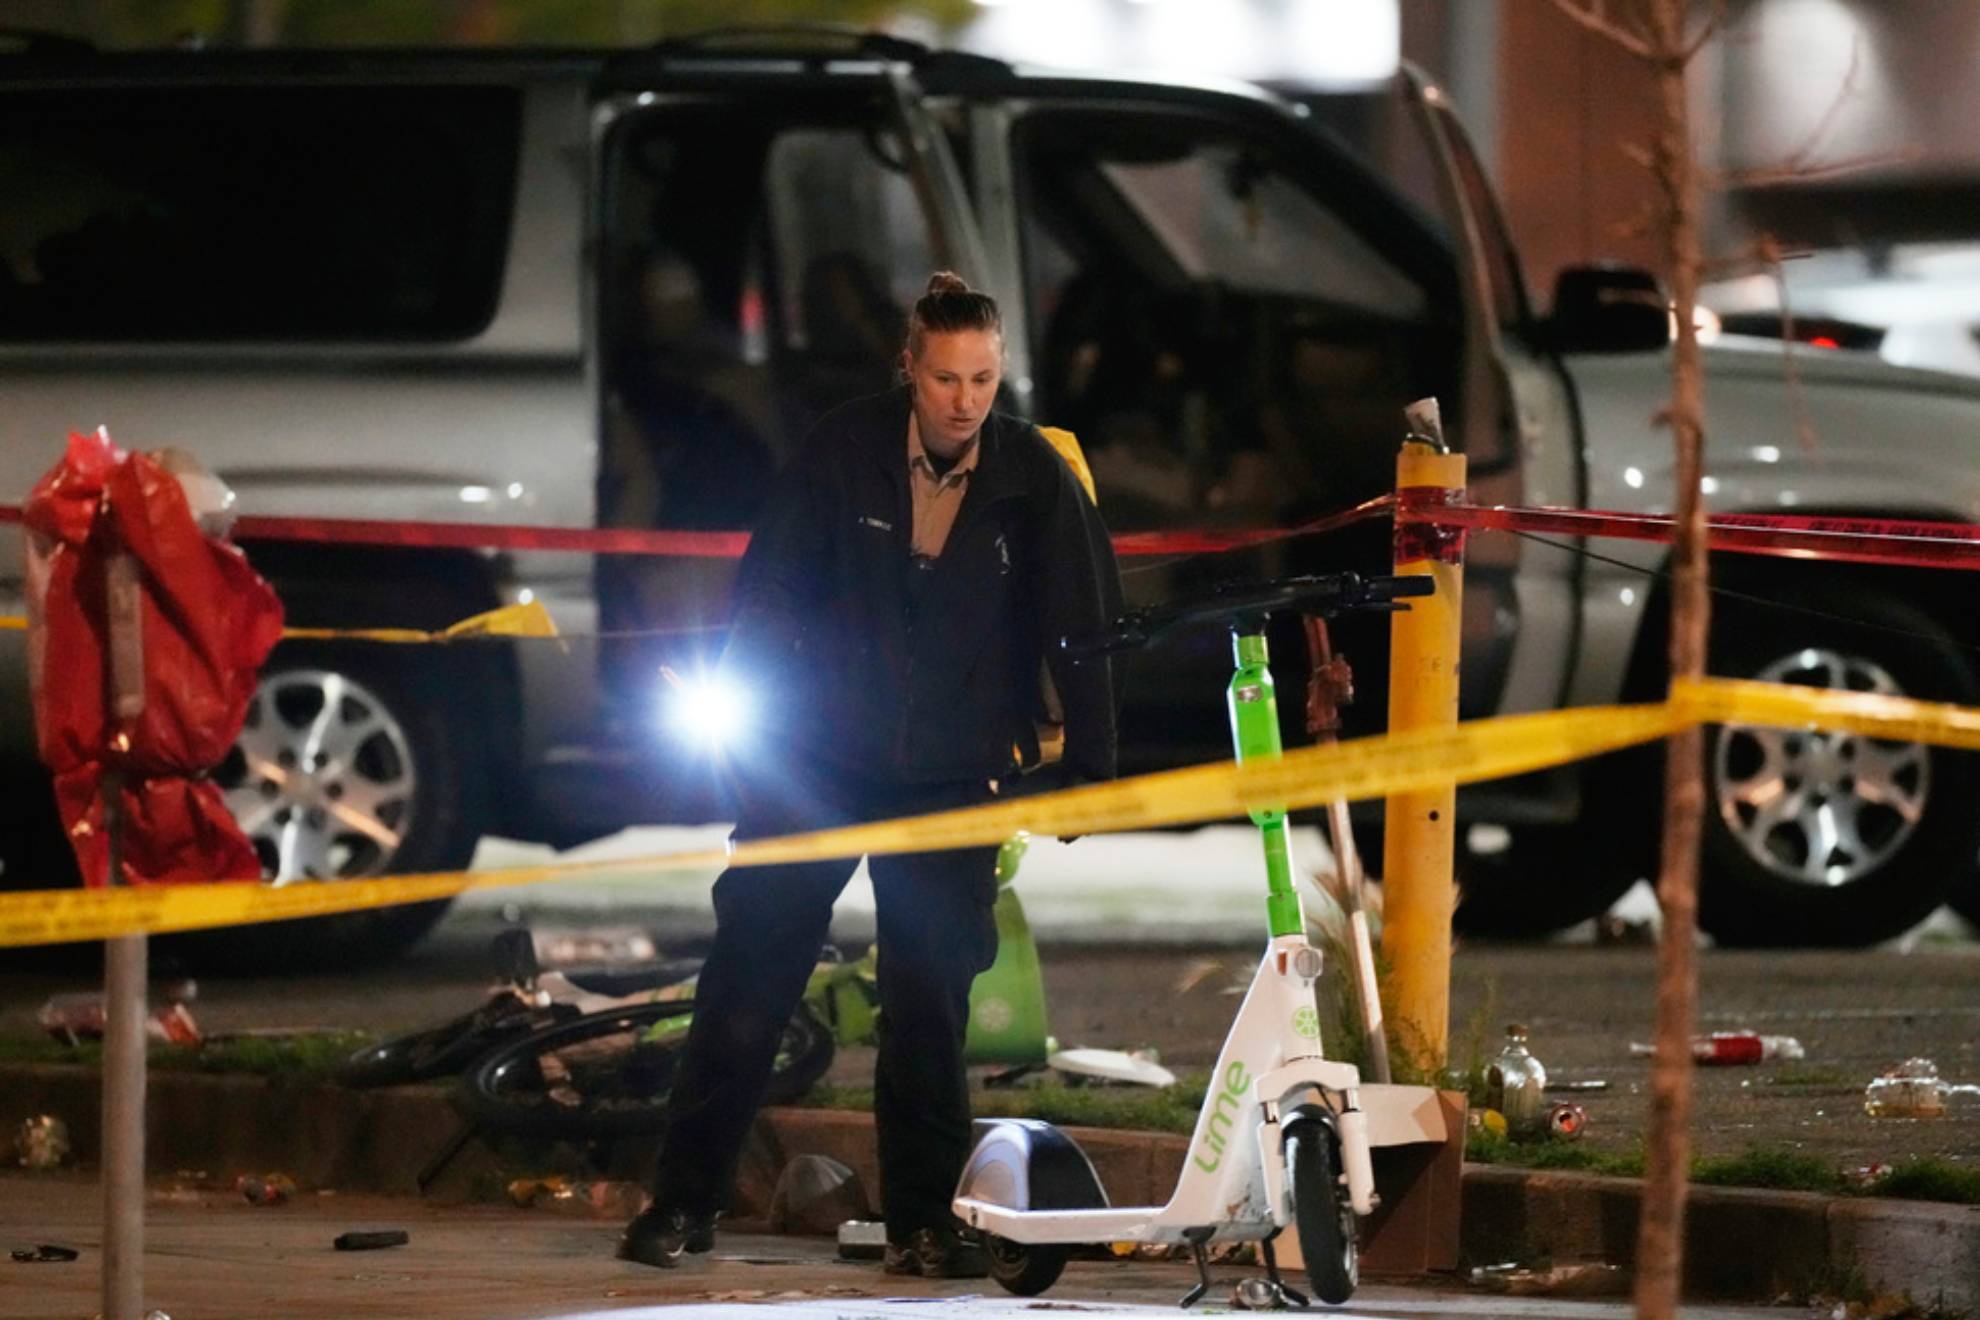 Denver Police Department investigators work the scene of a mass shooting